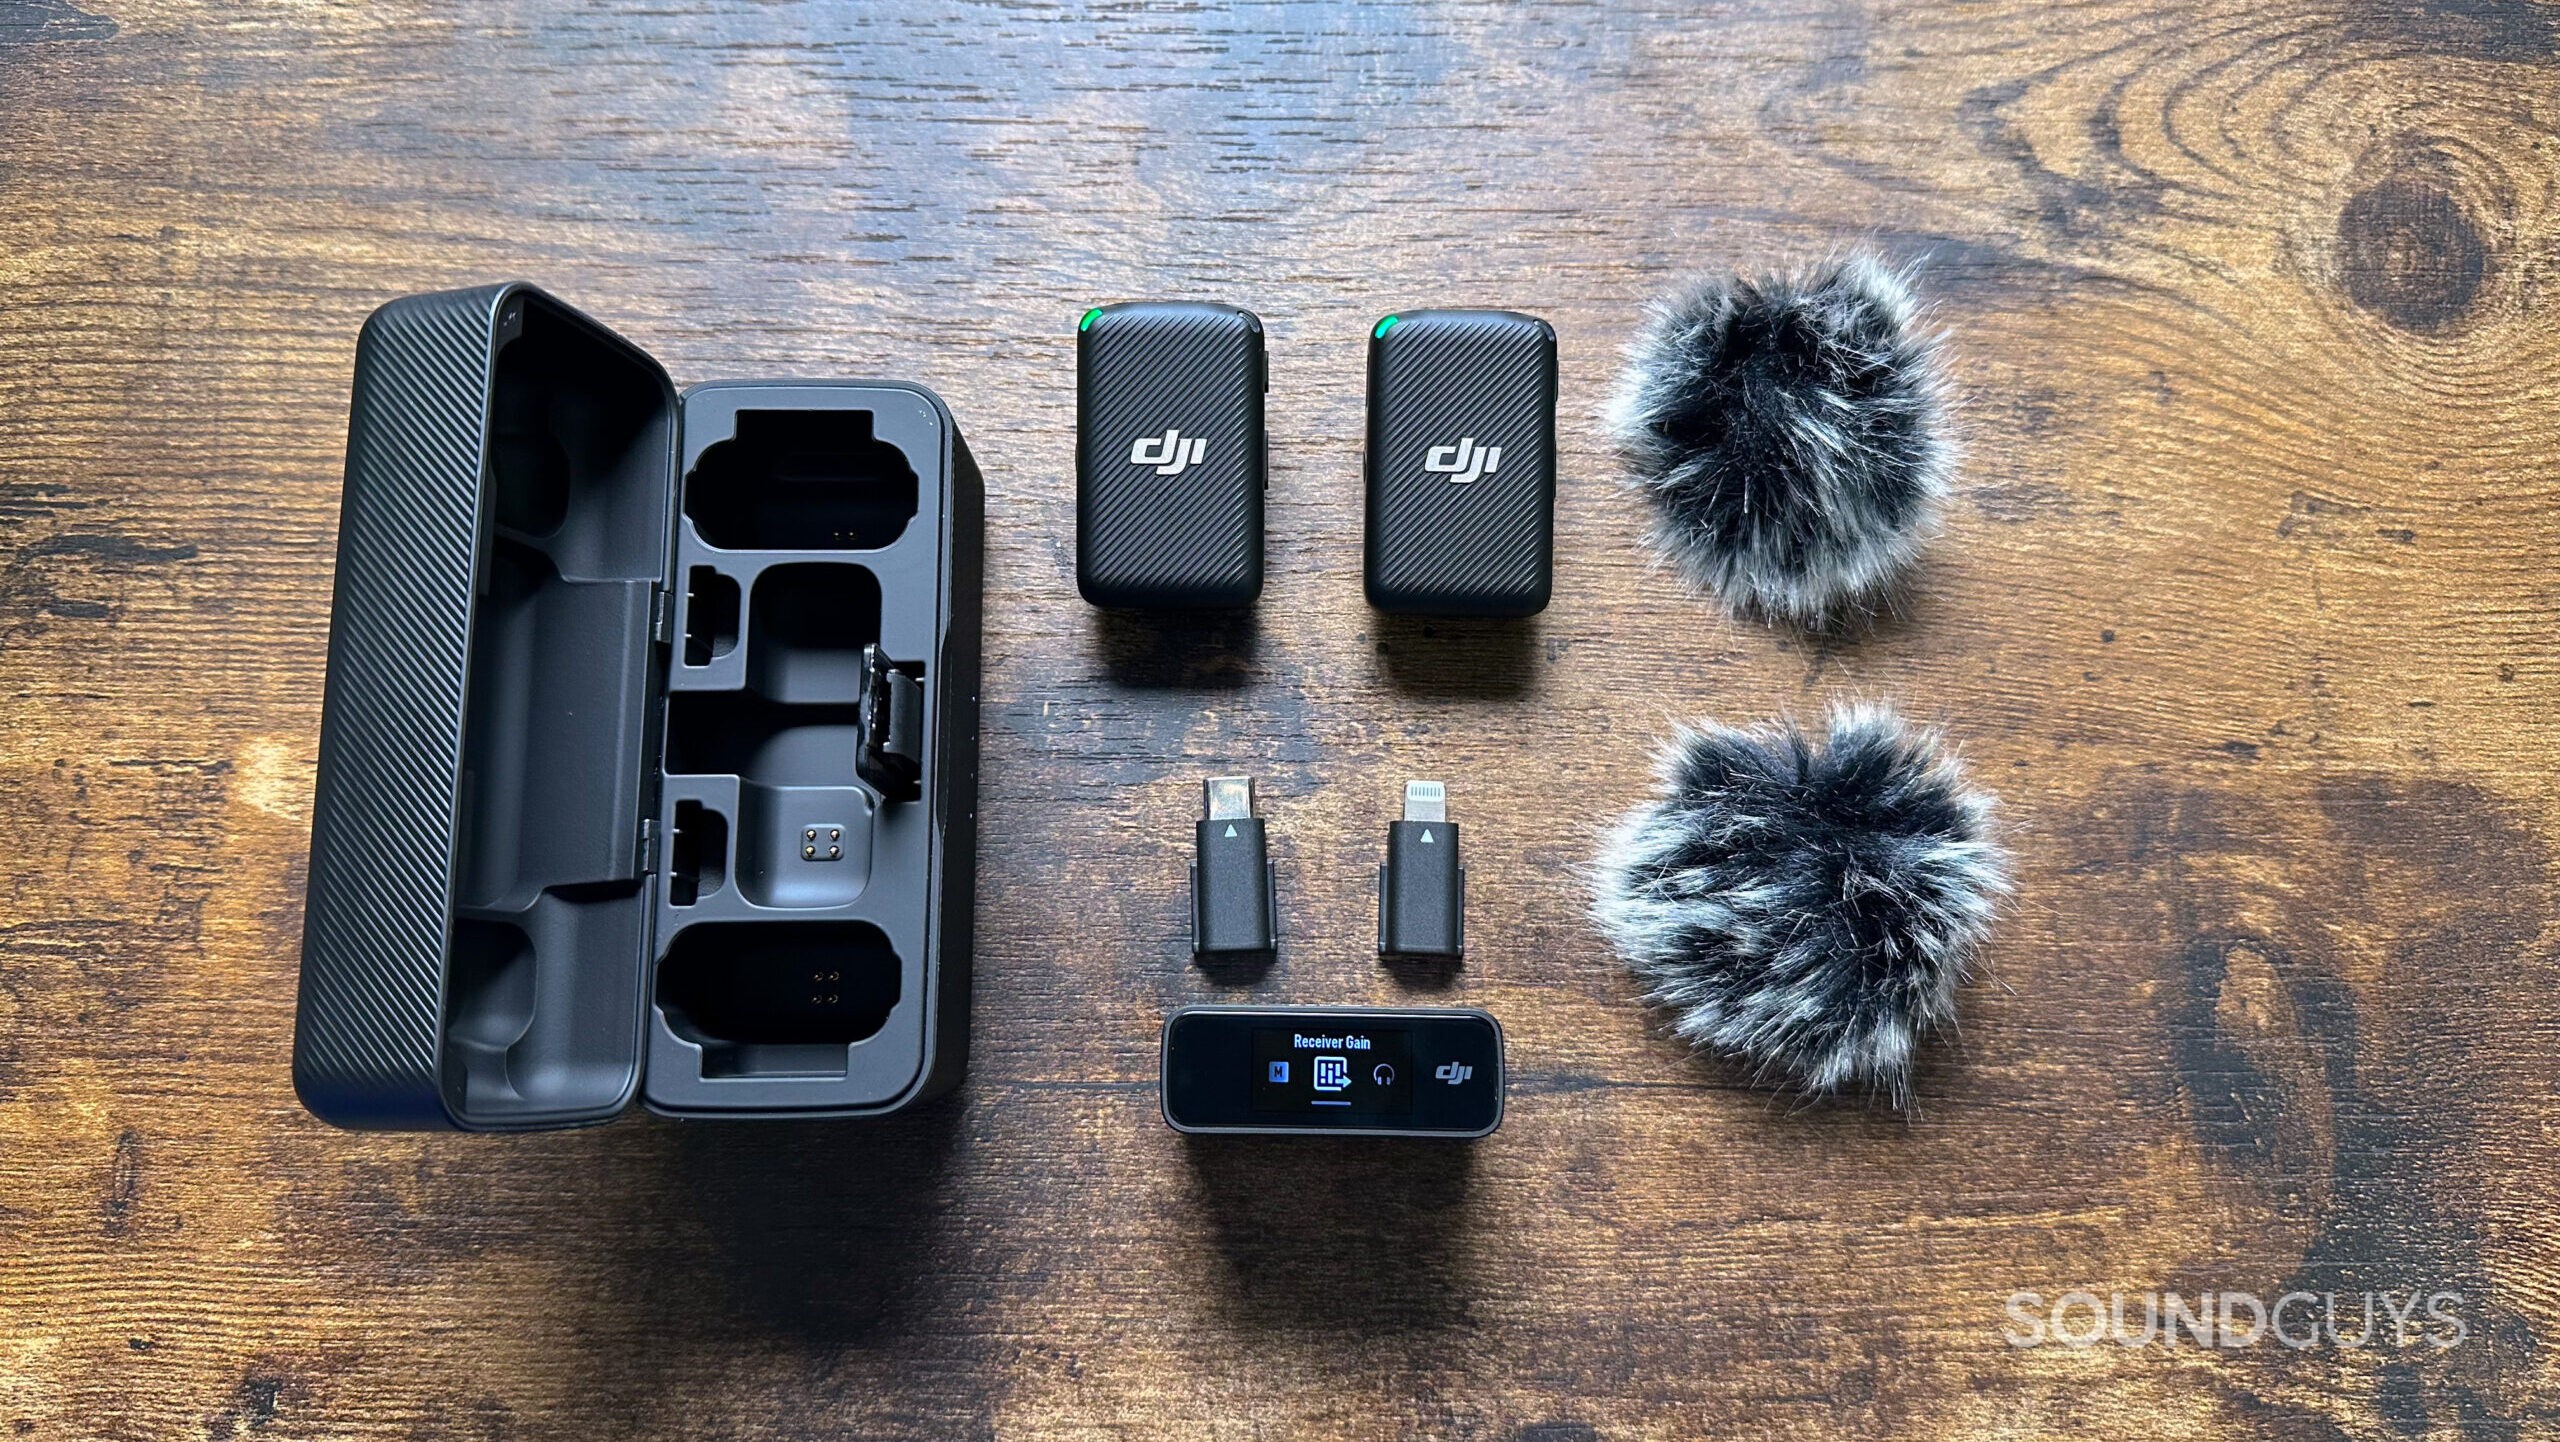 We Review the DJI Mic: The Best Portable Microphone for Your Video